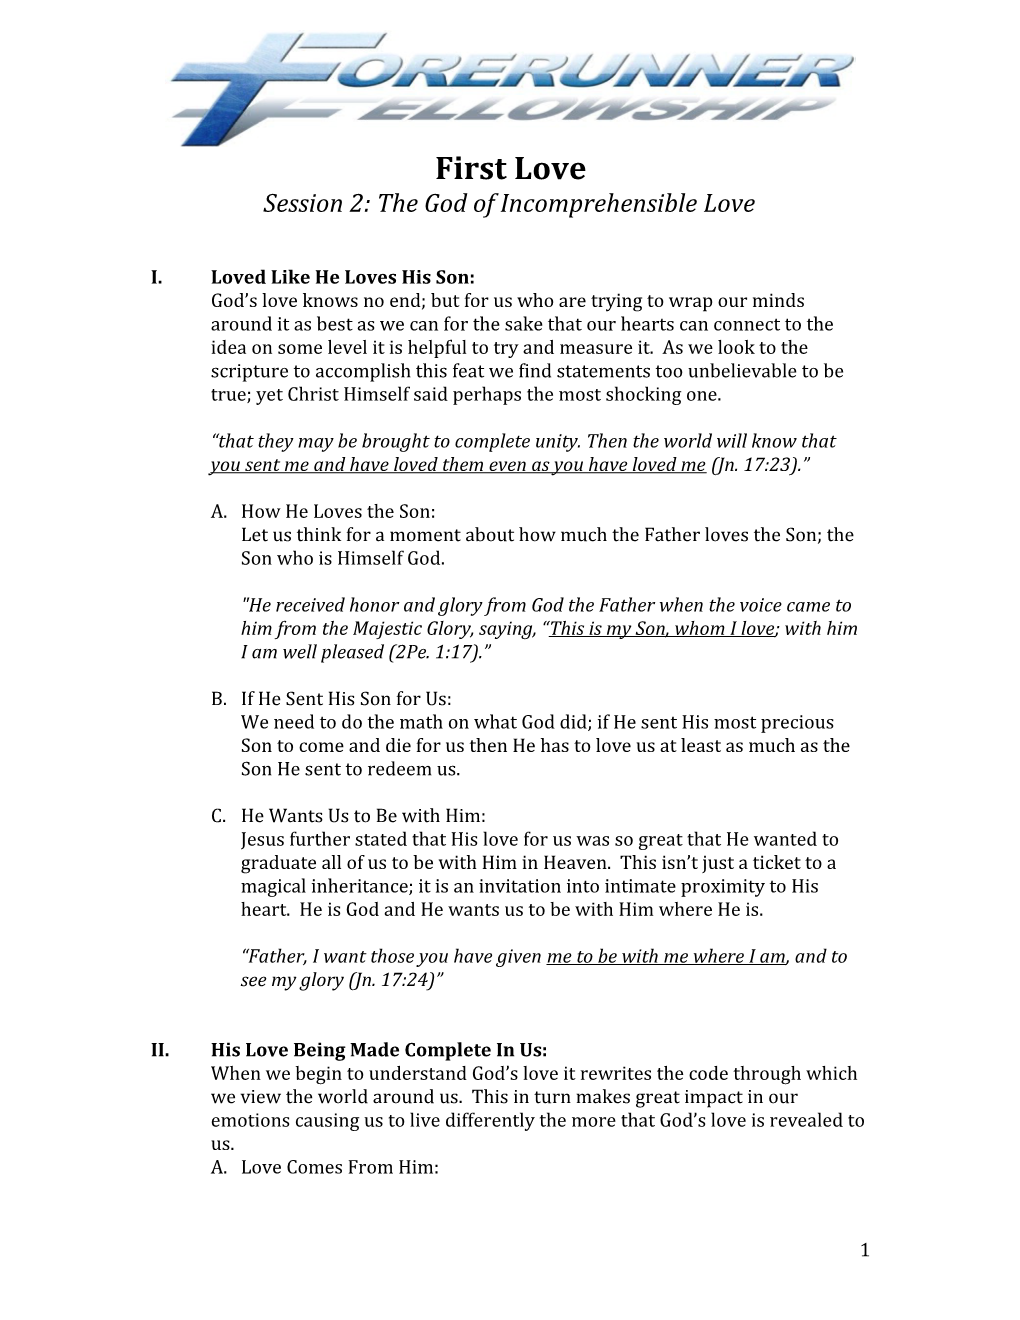 Session 2: the God of Incomprehensible Love